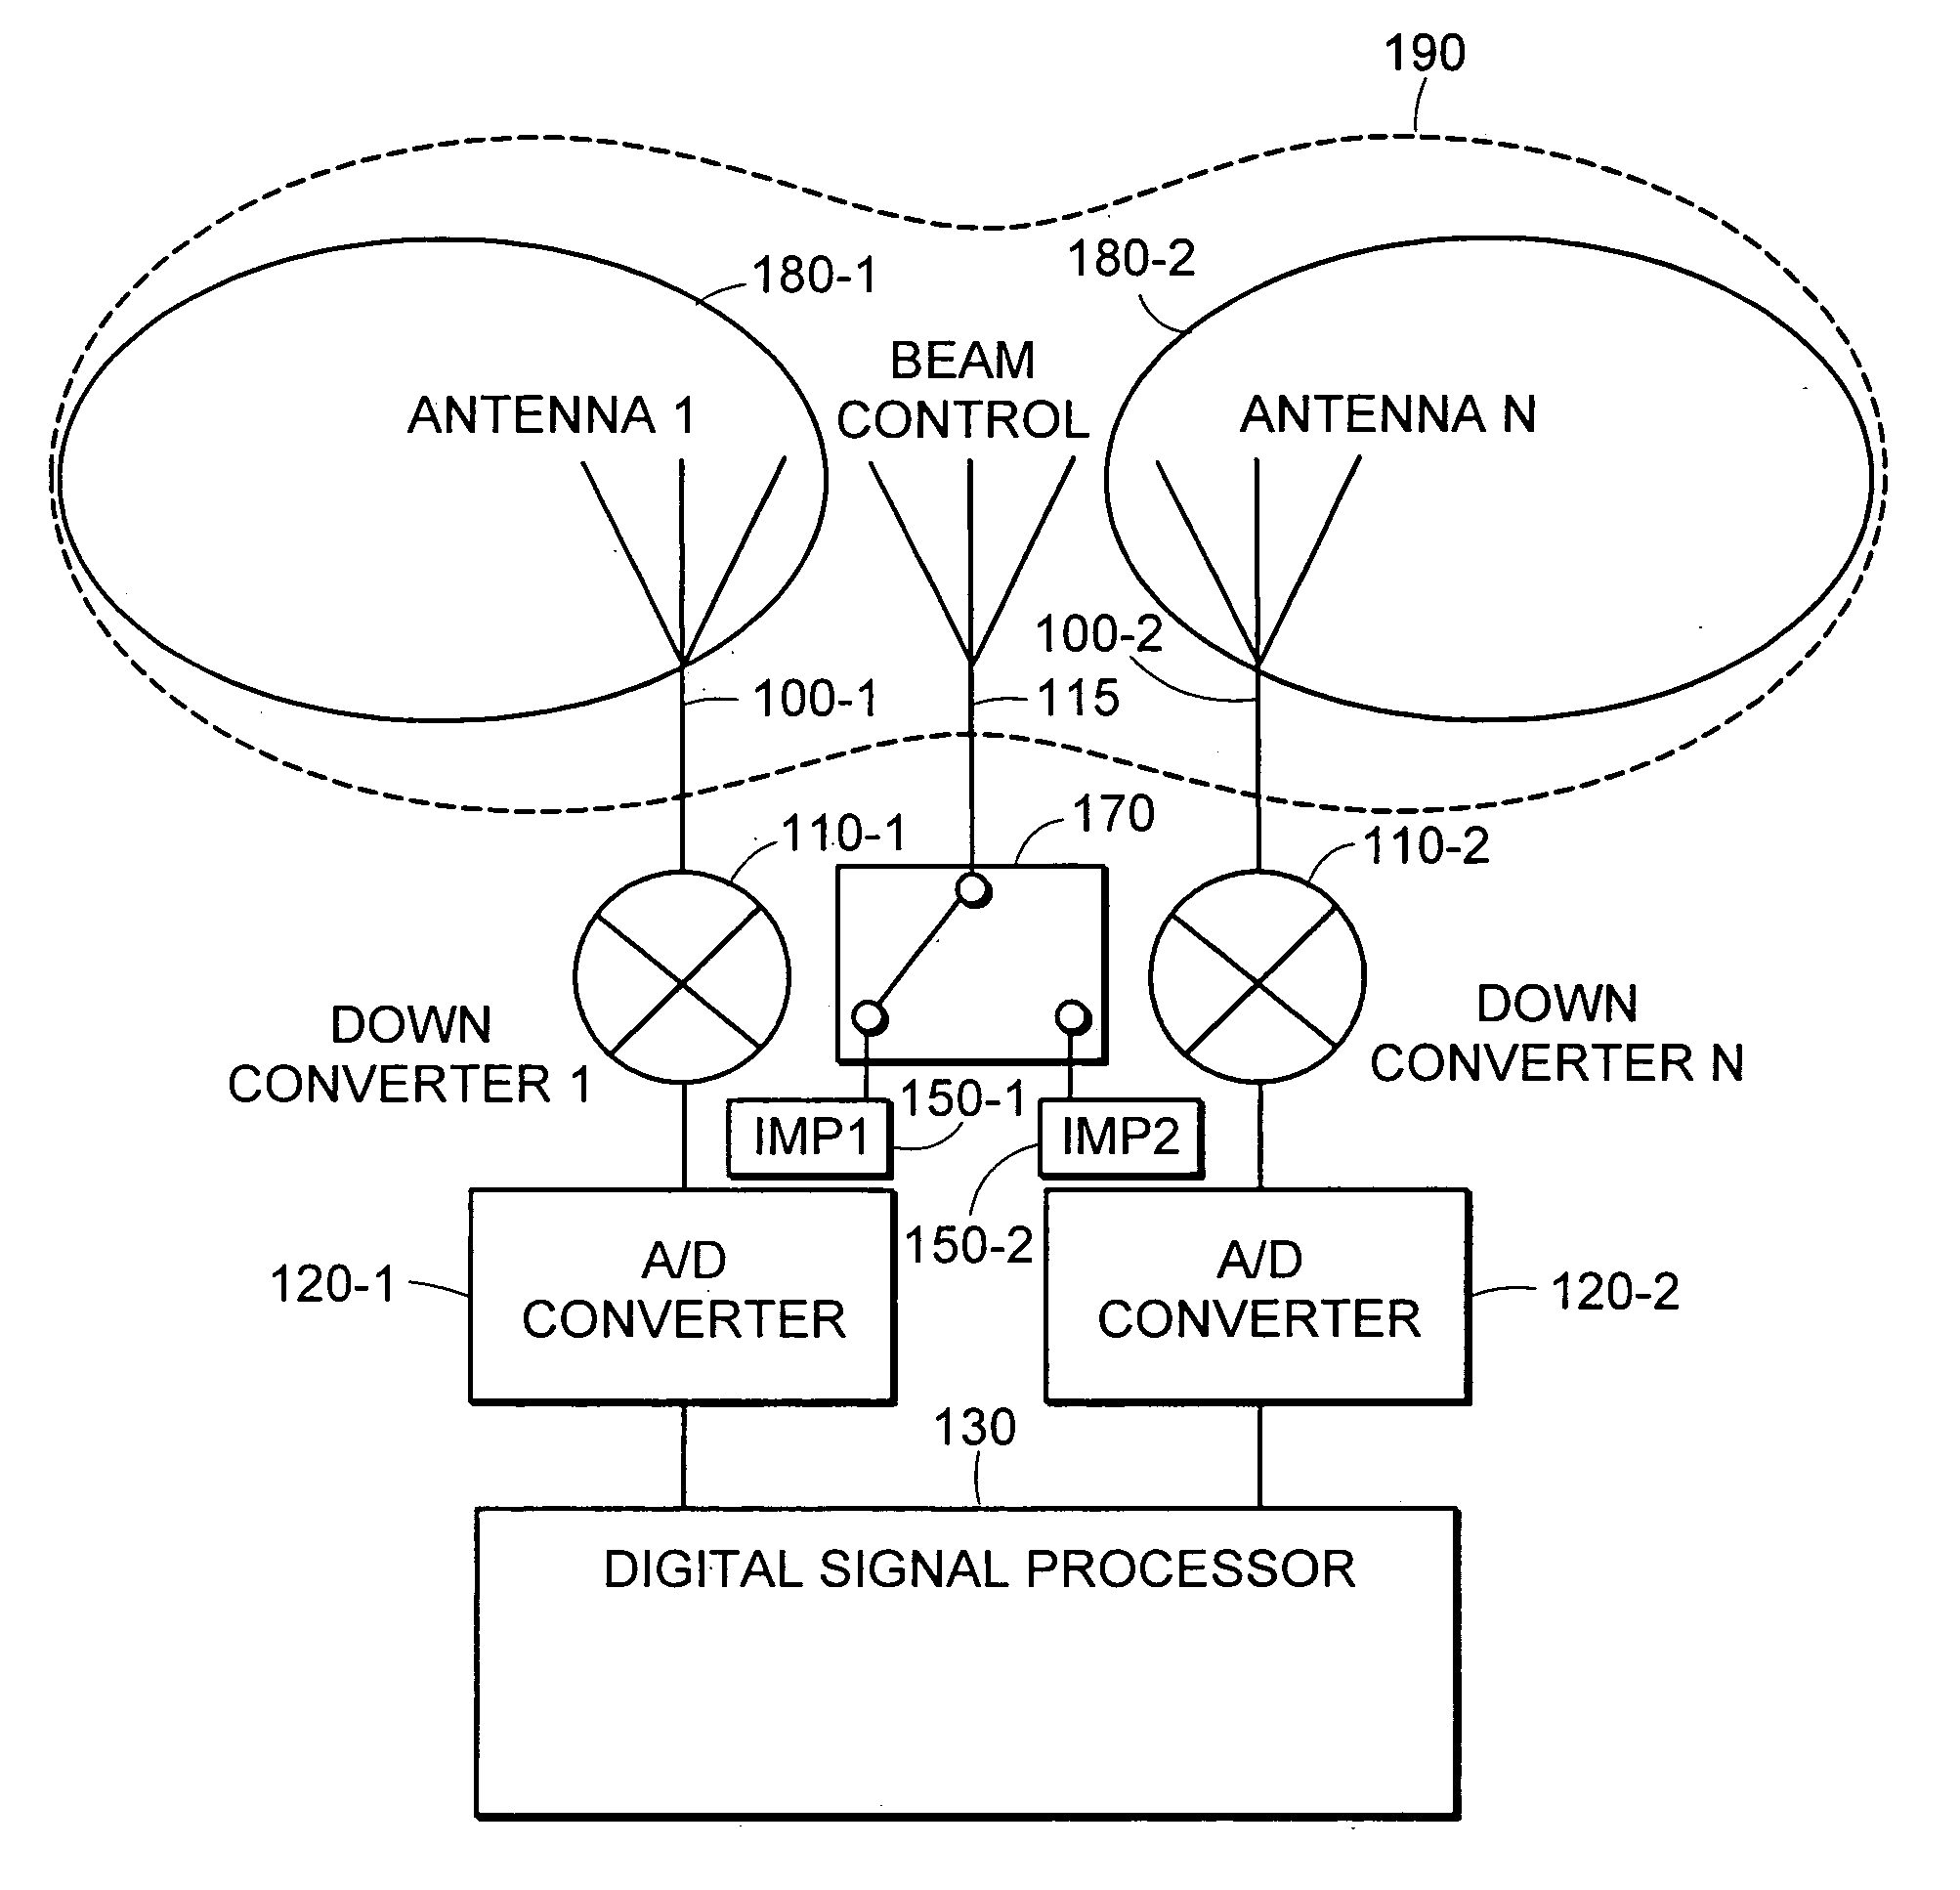 Low cost multiple pattern antenna for use with multiple receiver systems